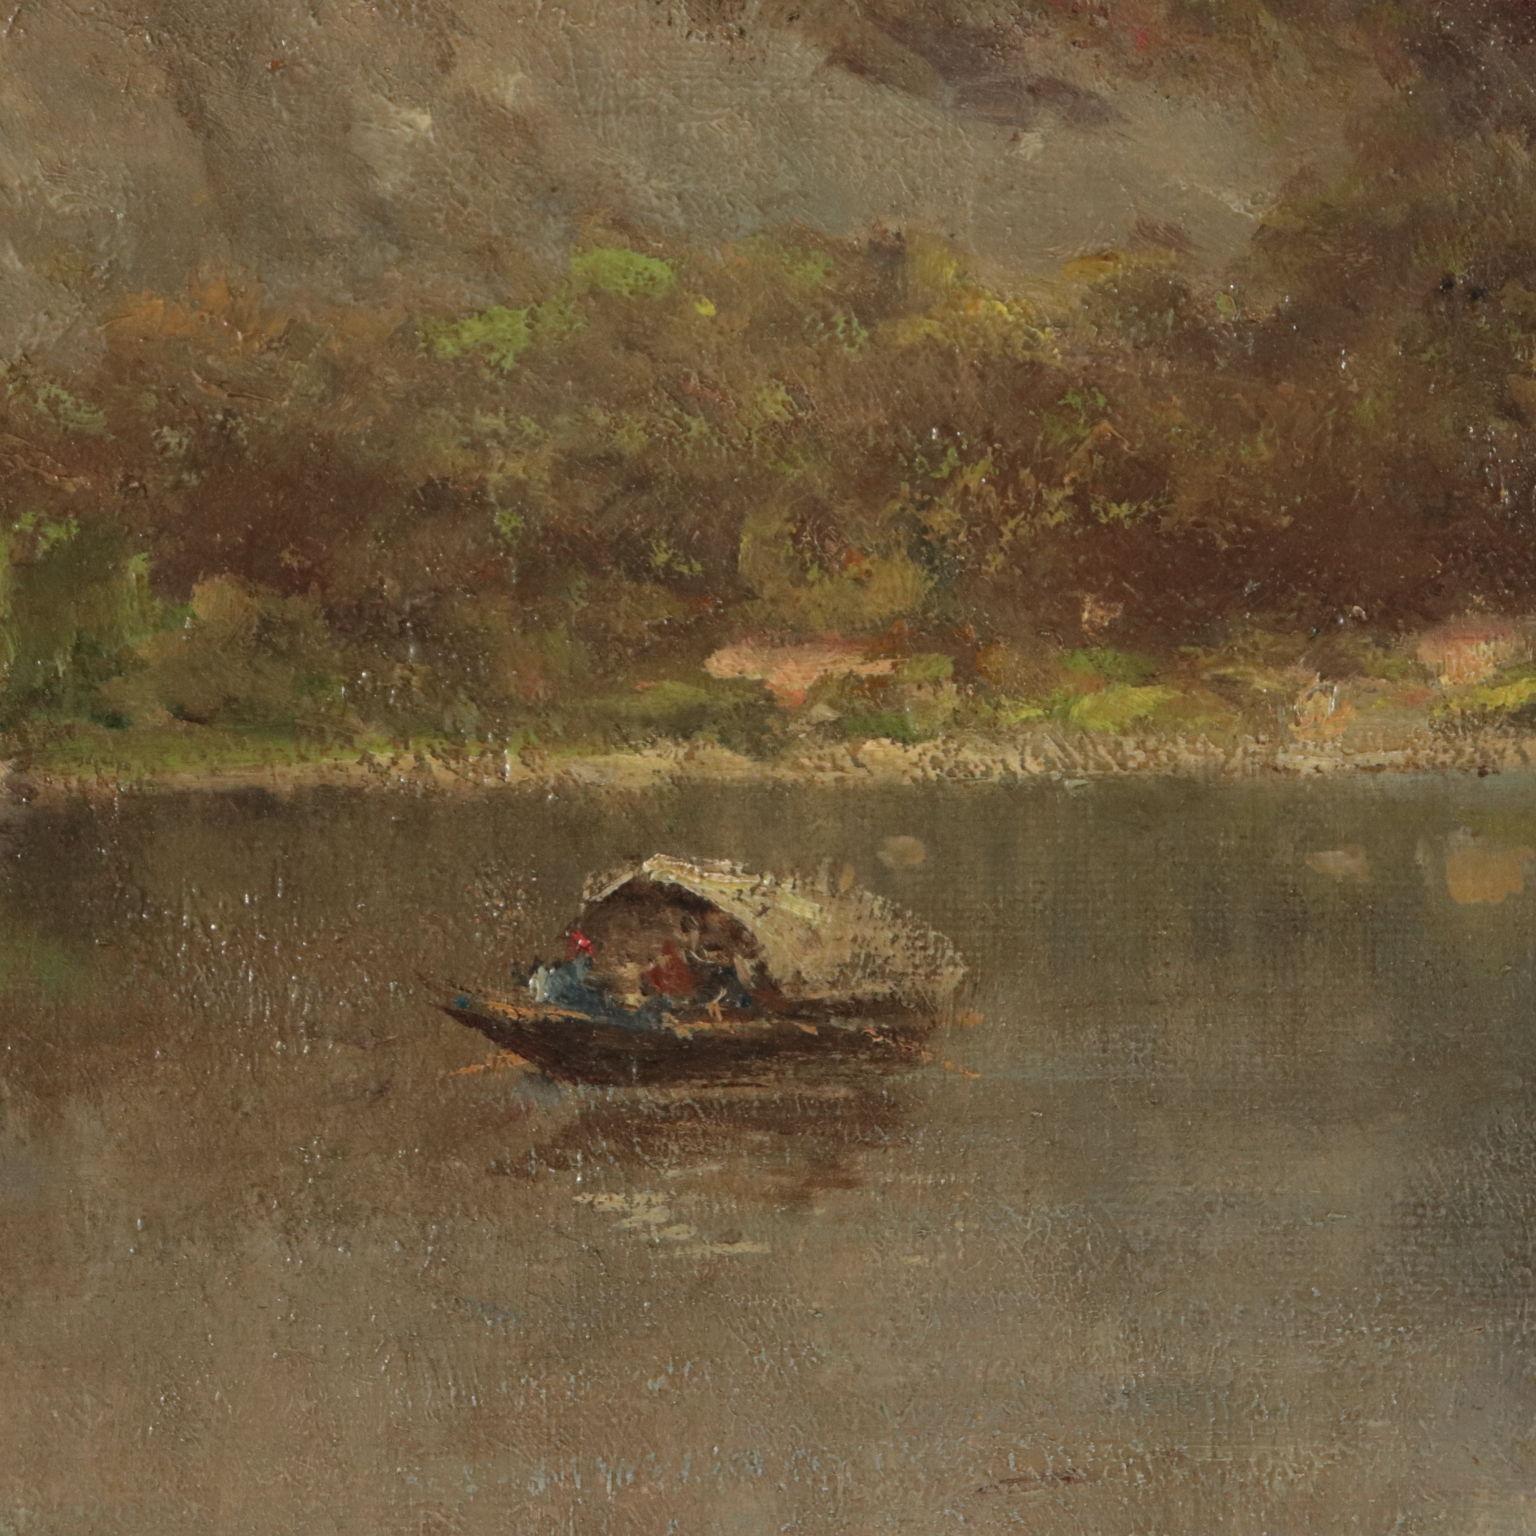 Landscape attributable to Silvio Poma, Oil on Canvas, 19th Century - Brown Landscape Painting by Unknown